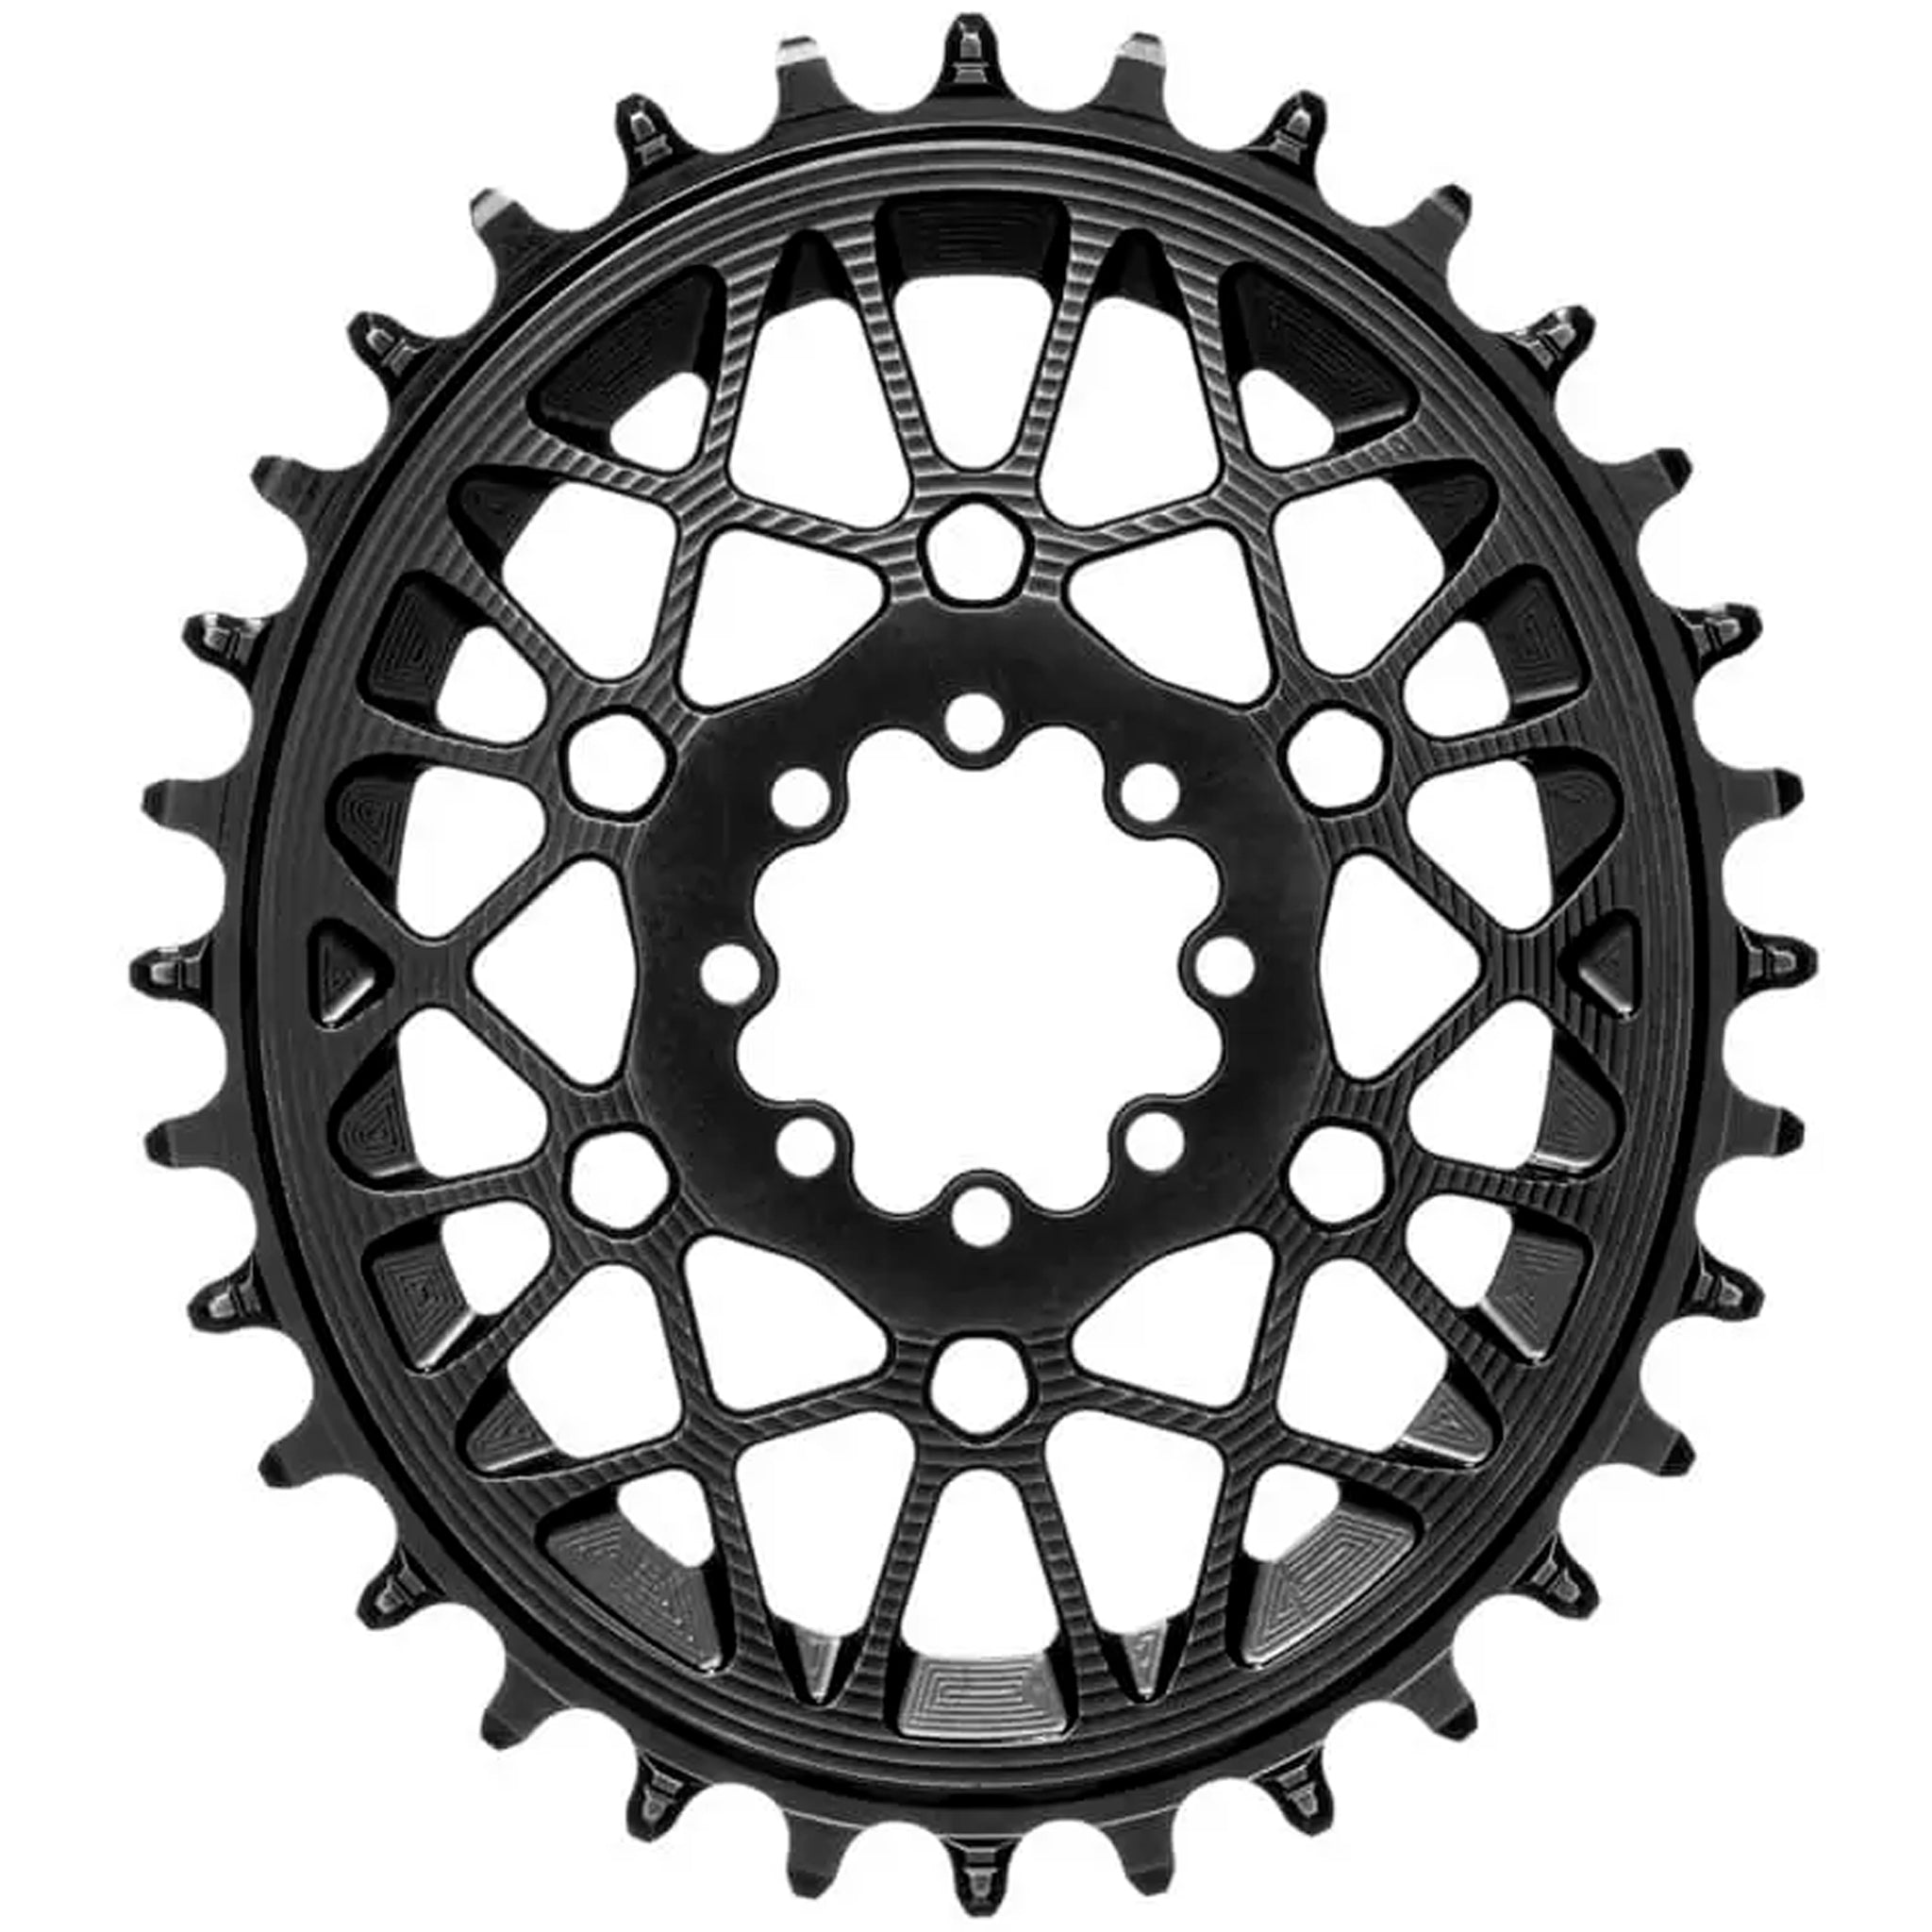 Absolute Black Oval SRAM T-Type DM 8-Hole Boost Chainring 32T Blk